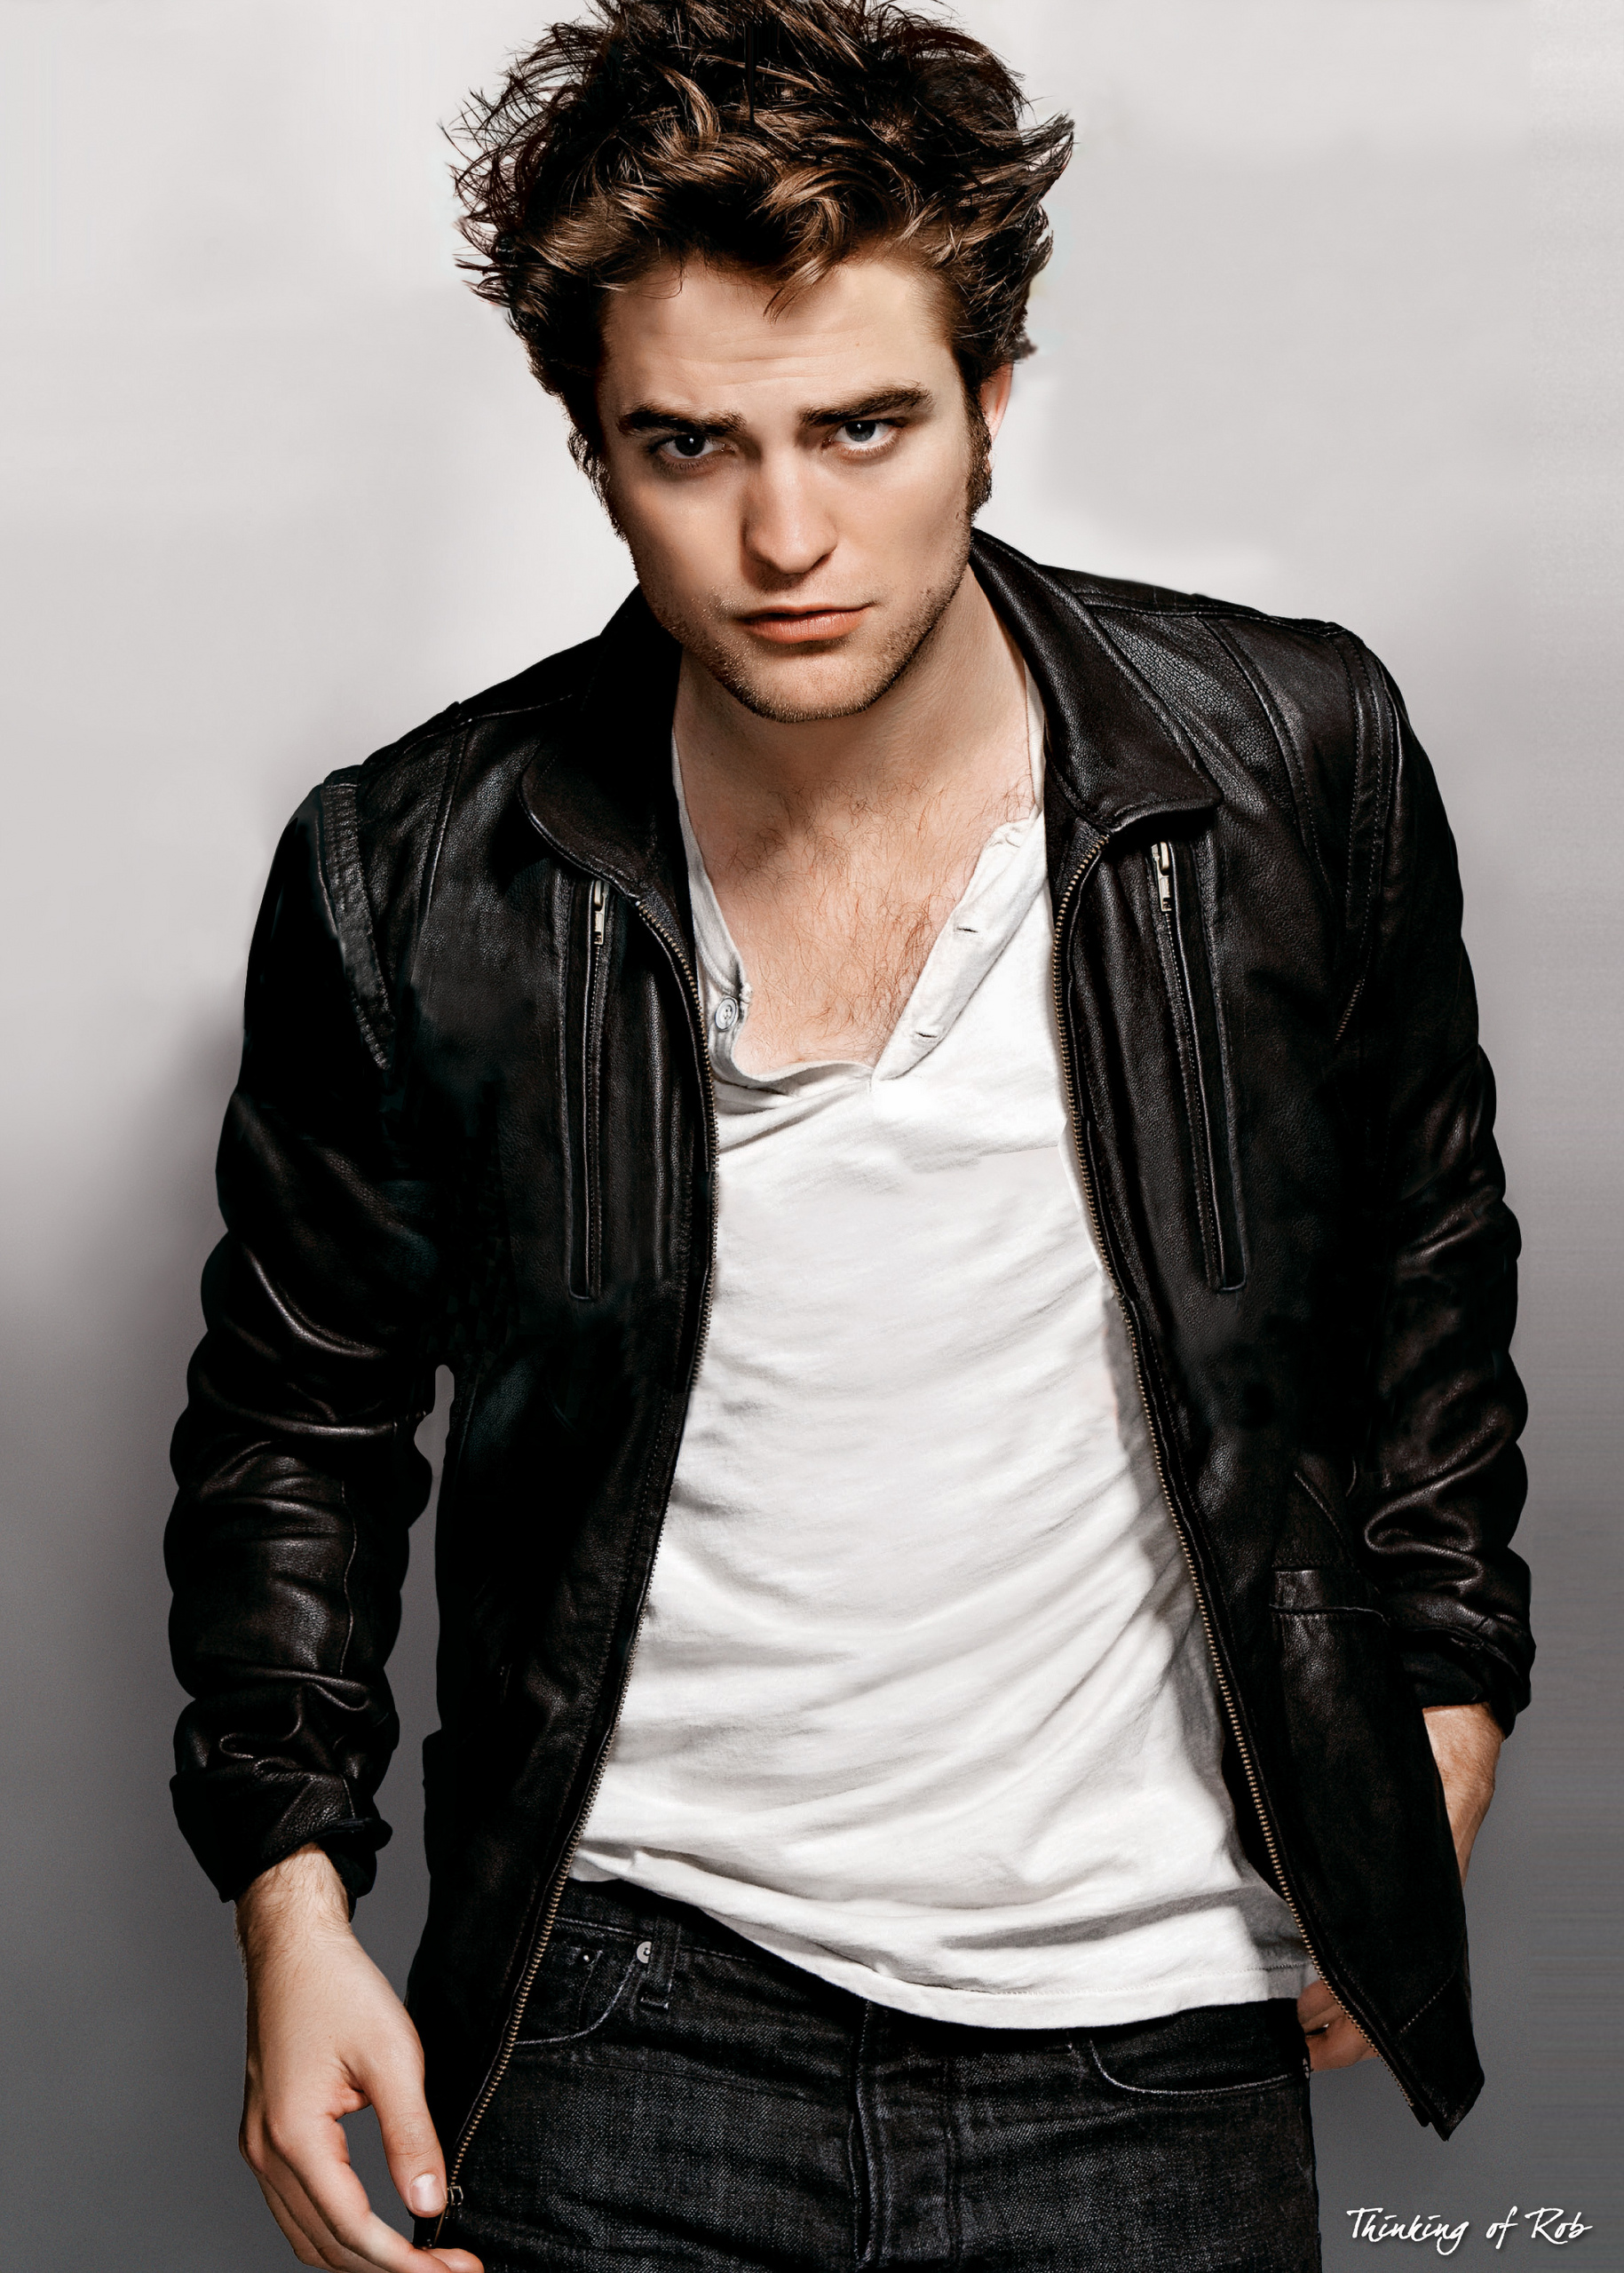 Amazing Robert Pattinson Pictures & Backgrounds